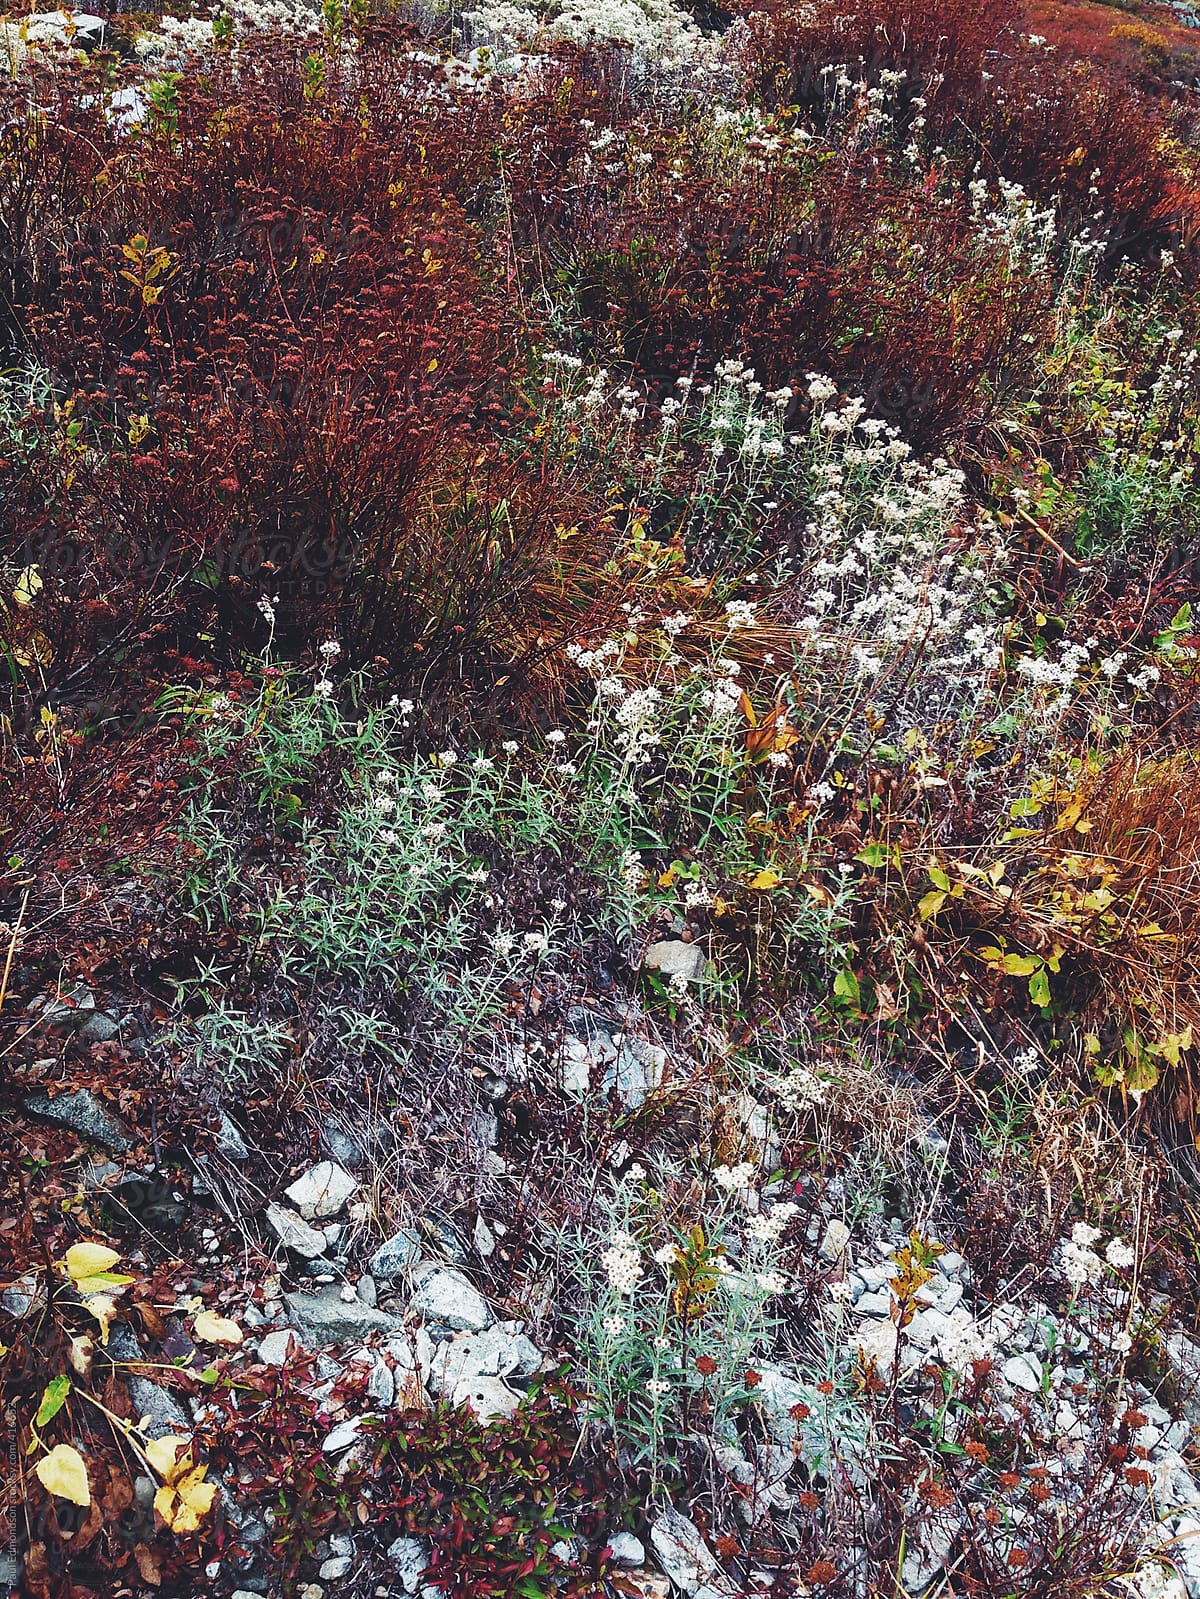 Detail of wildflowers, grasses and plants in apine meadow in autumn